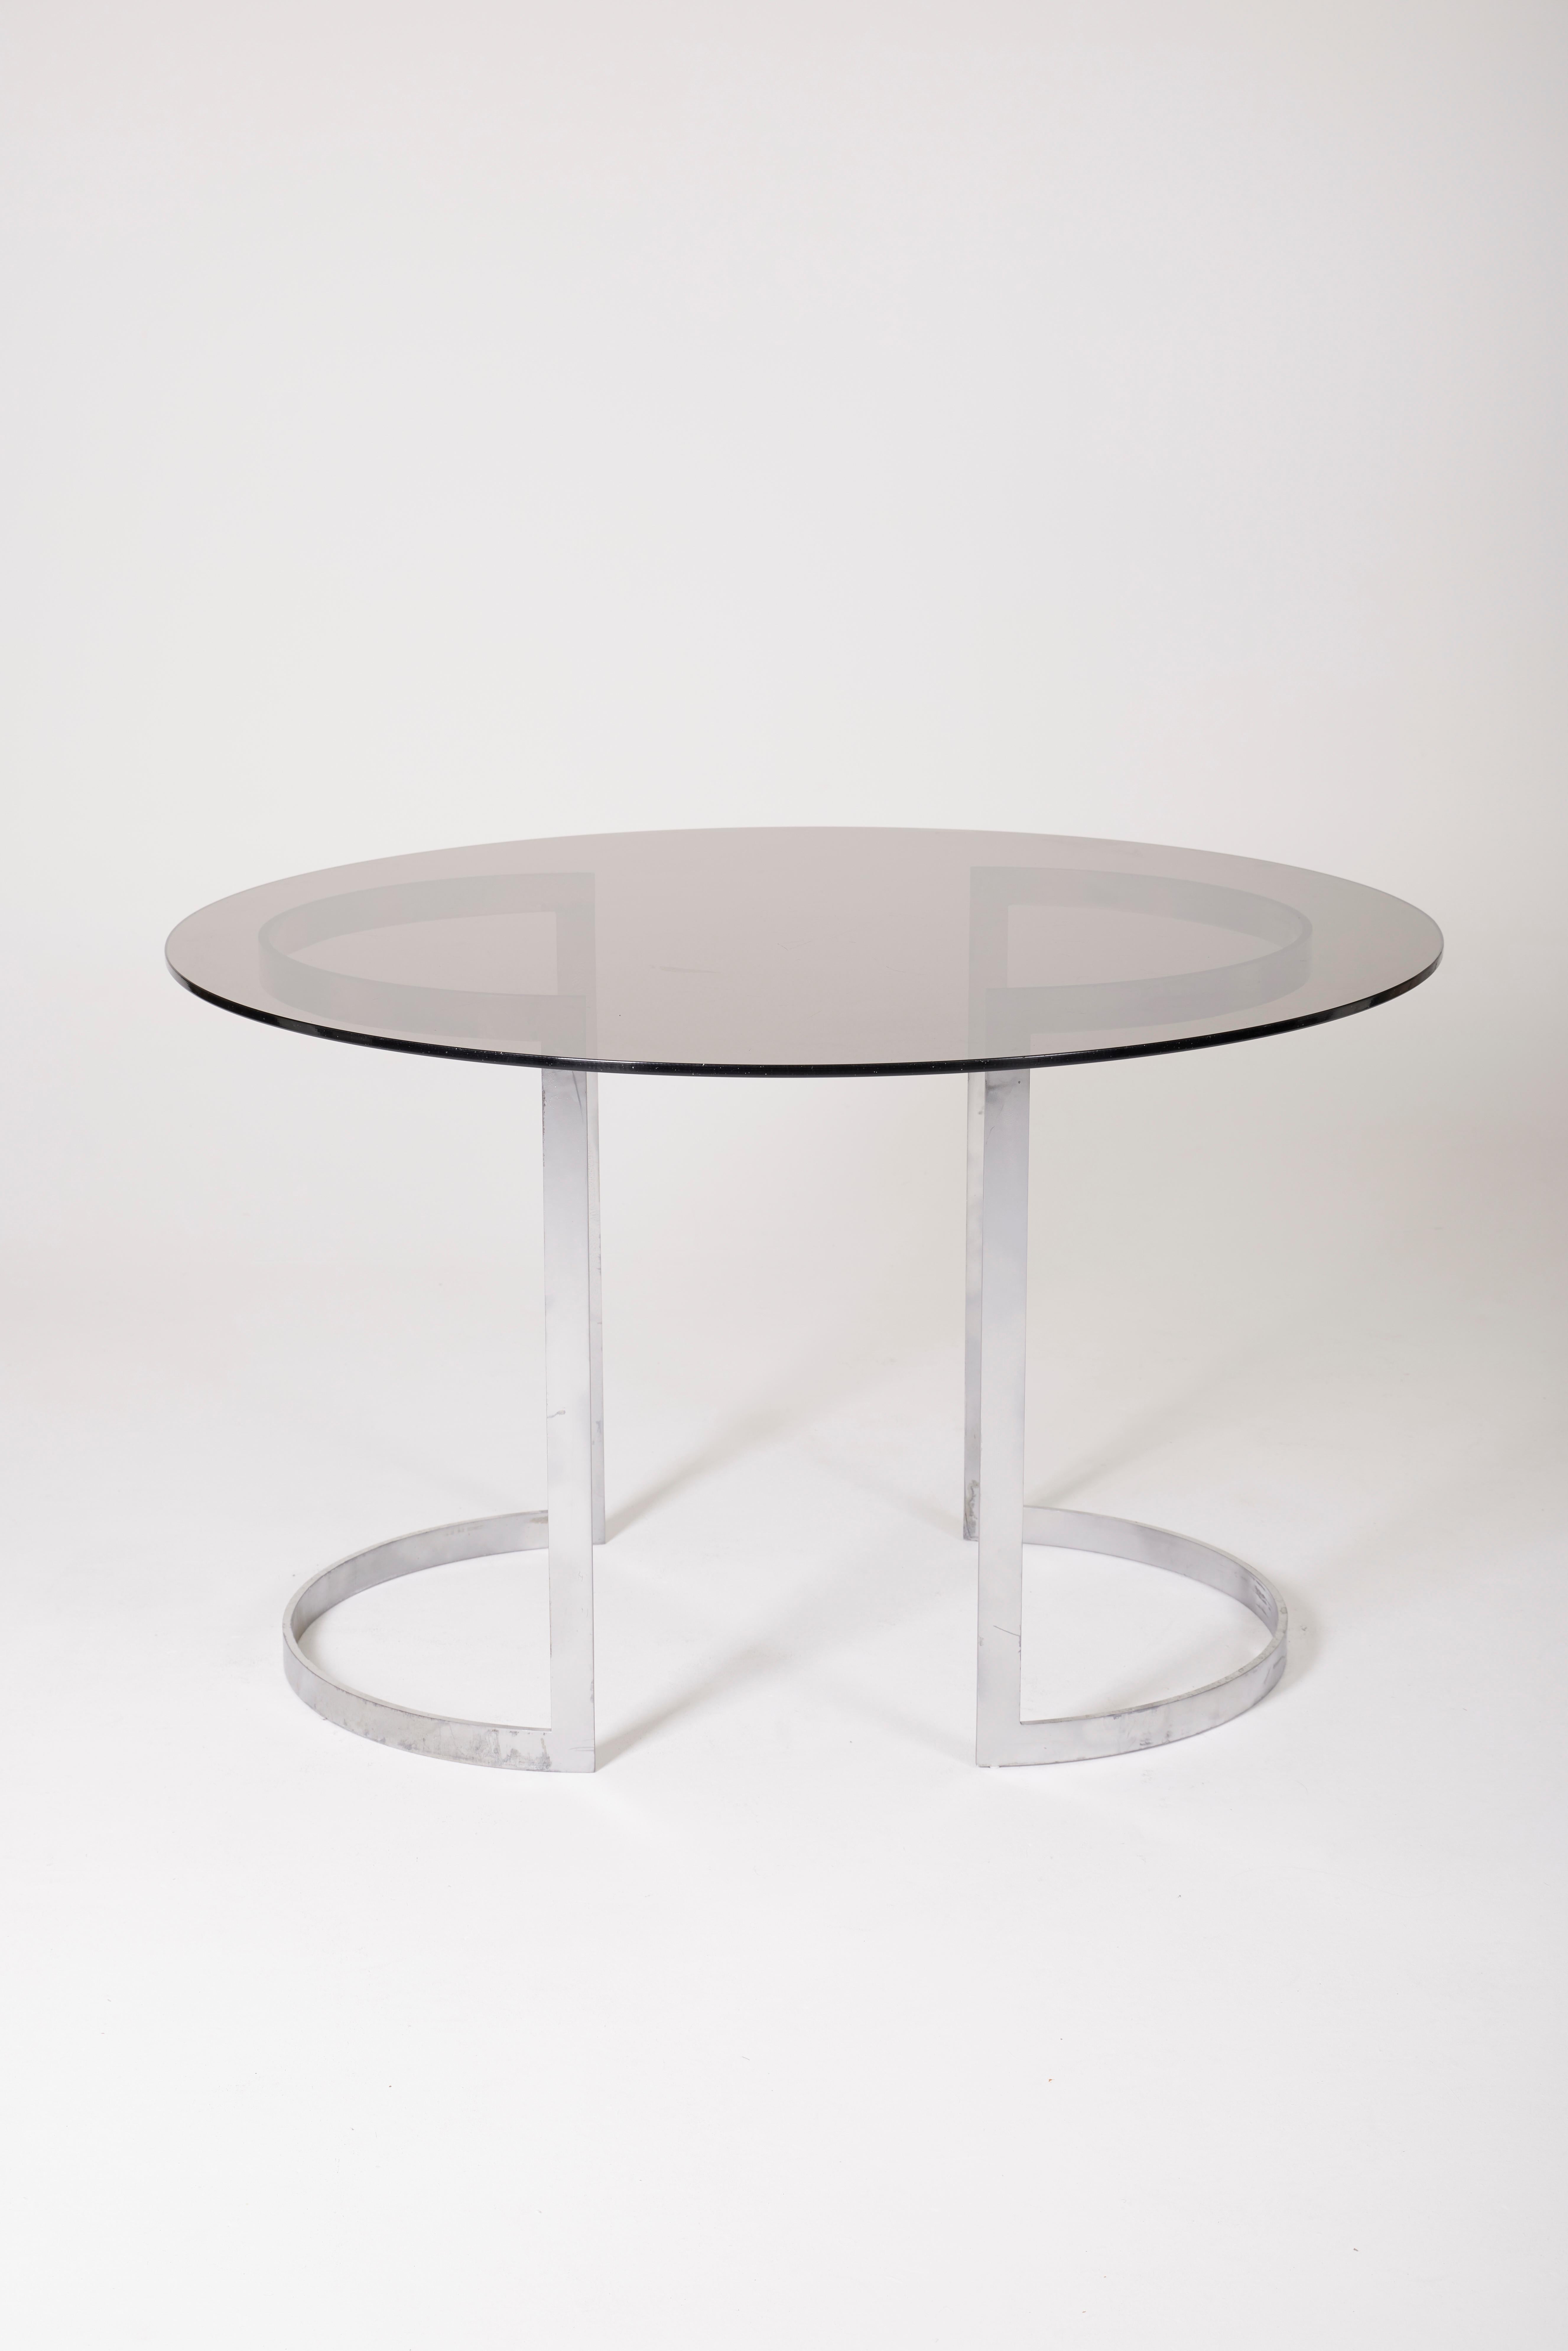 Dining table by designer Boris Tabacoff (1927-1985), 1970s. The top is made of smoked glass in a circular shape. It rests on a double curved chrome-plated metal base. Good condition.
LP1621